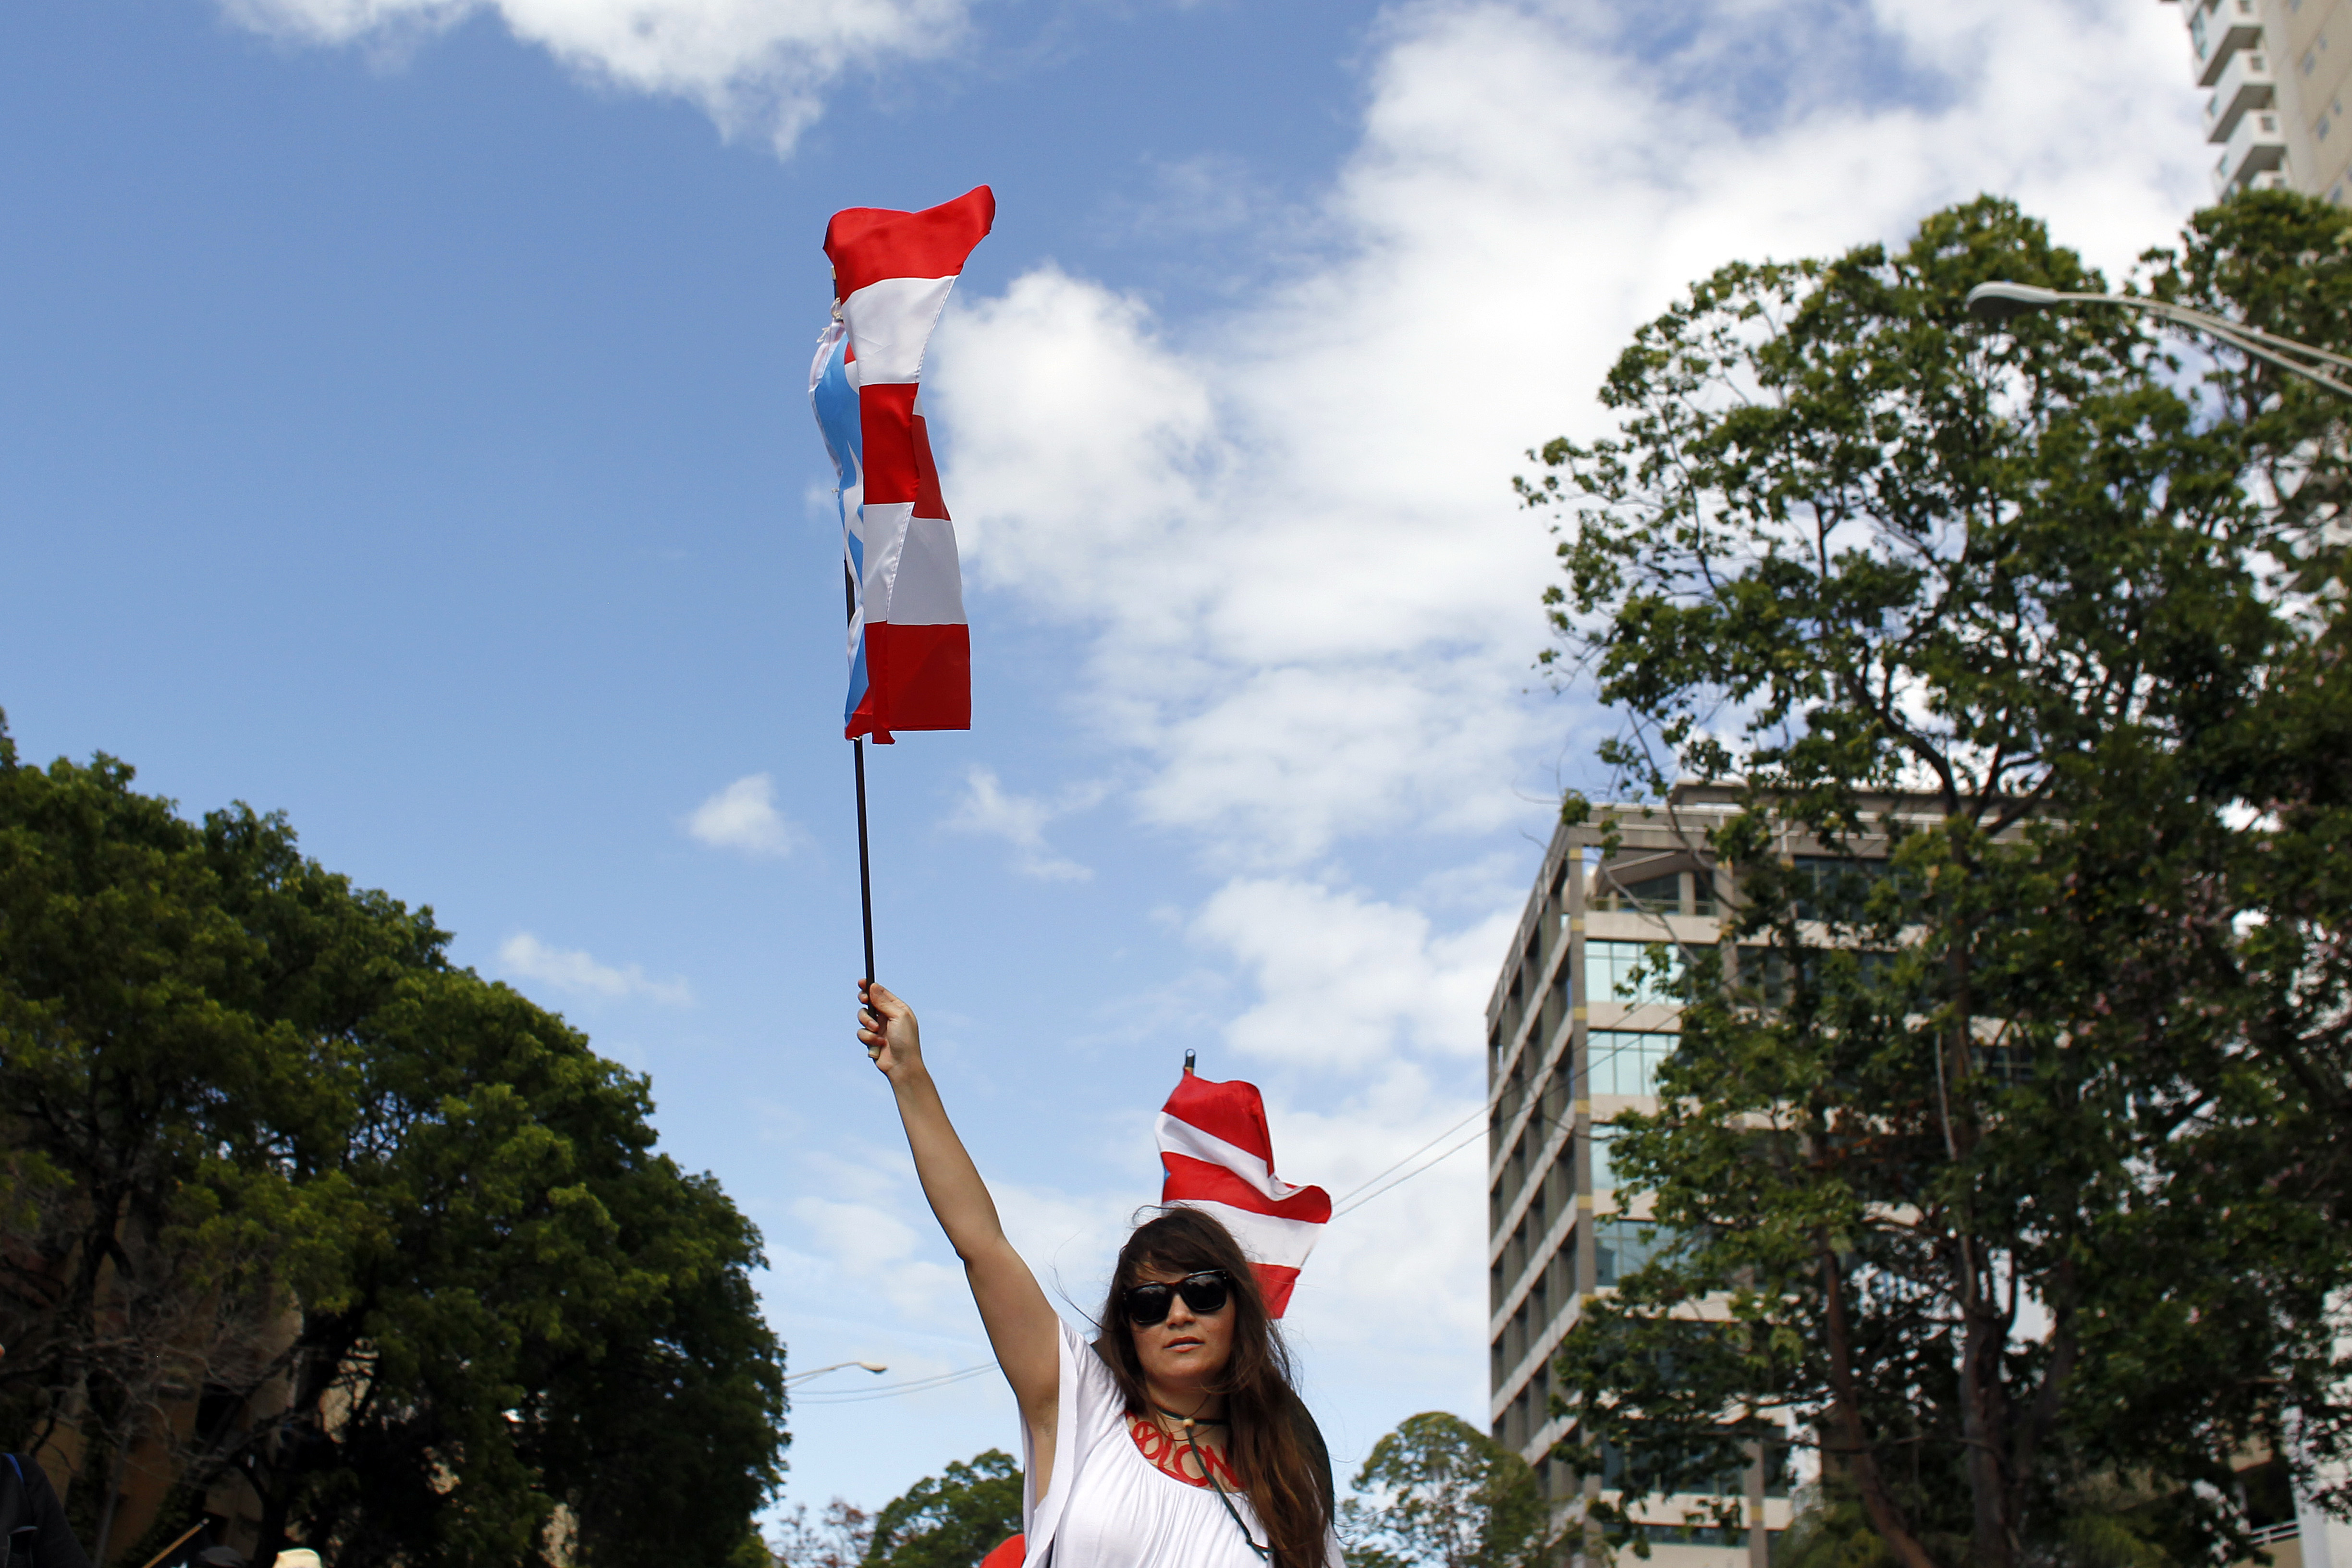 A woman waves a Puerto Rican flag during a protest against the referendum over Puerto Rico’s political status in San Juan, on June 11, 2017.